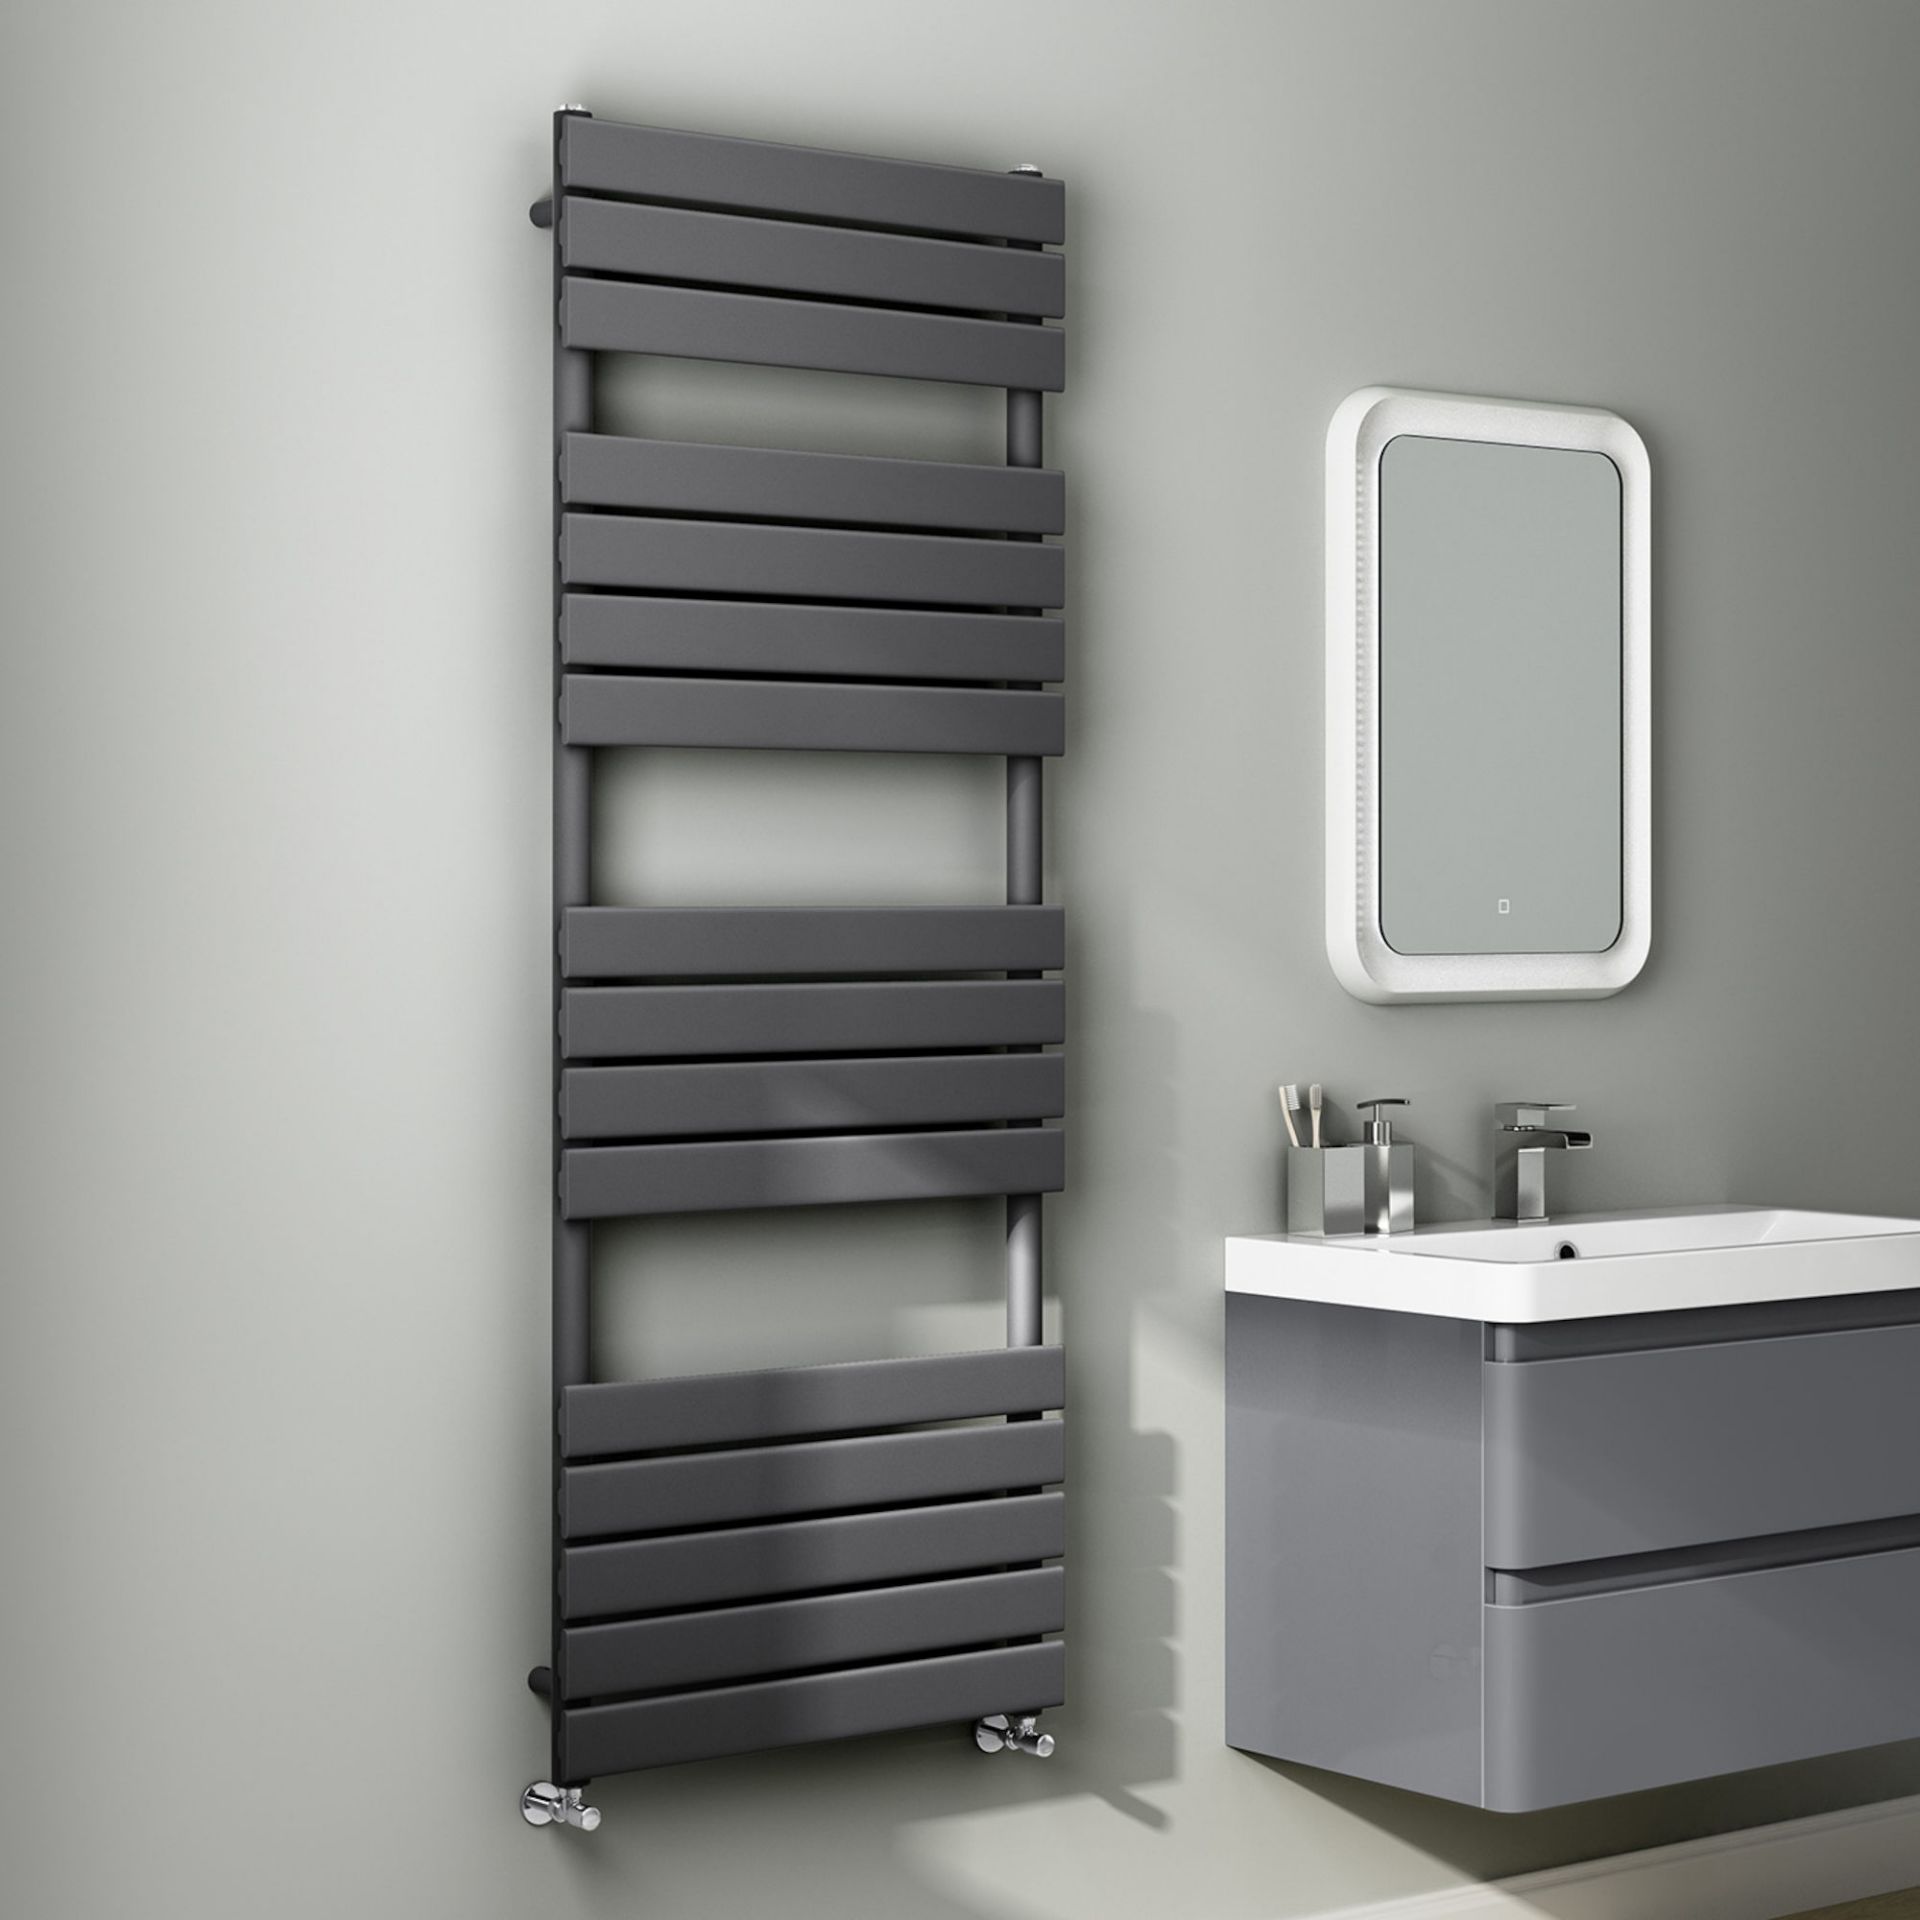 (DK125) 1600x600mm Anthracite Flat Panel Ladder Towel Radiator. RRP £399.99. Made with low carbon